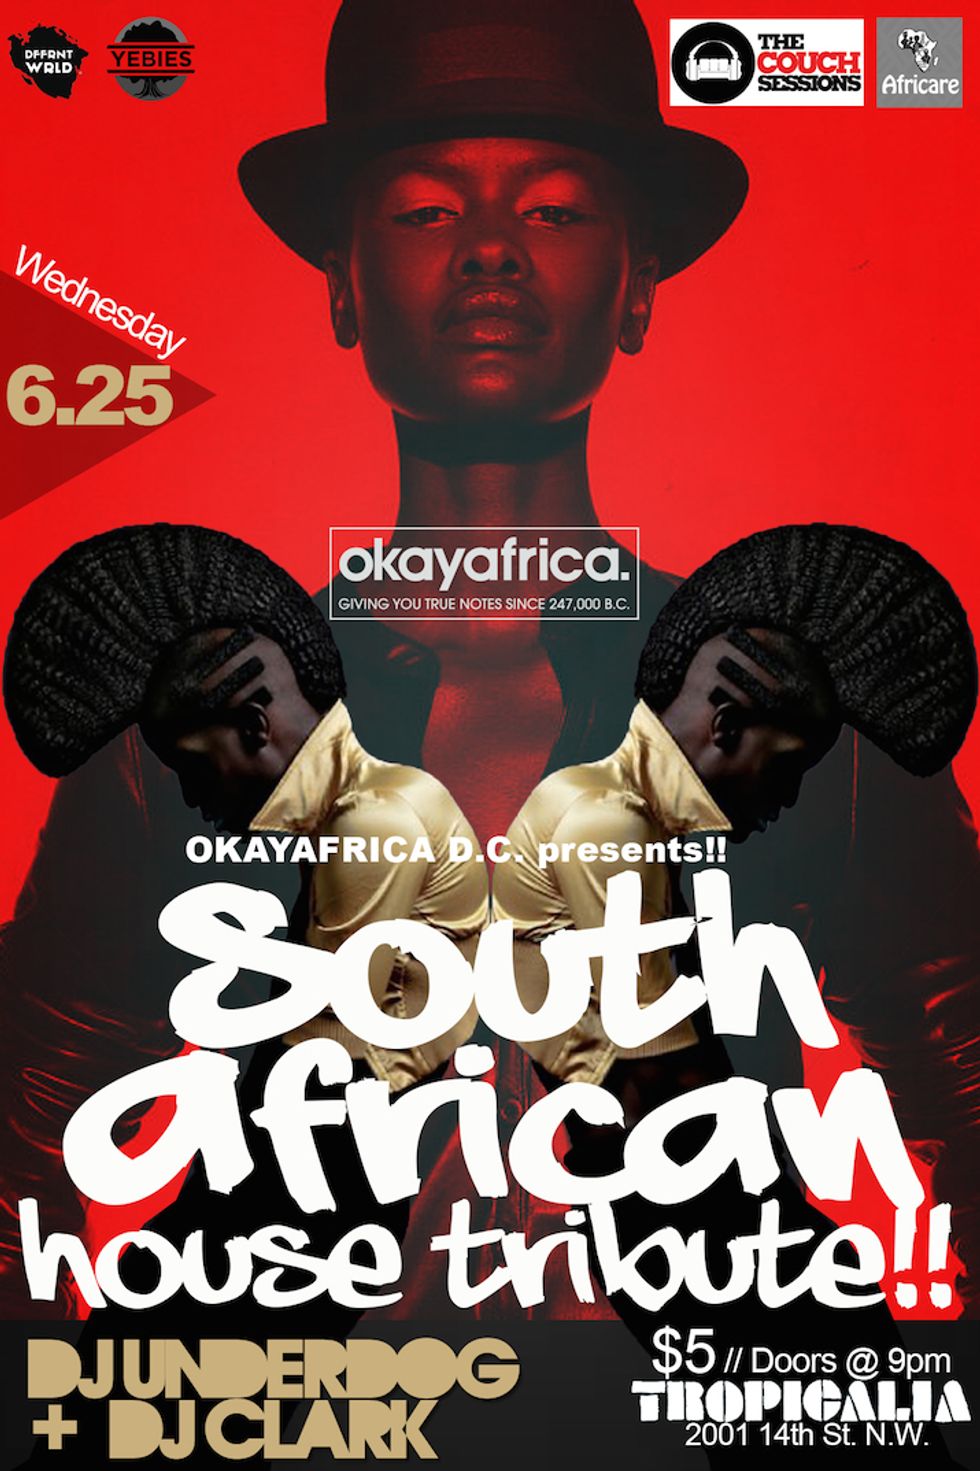 #OKAYAFRICADC: South African House Tribute!